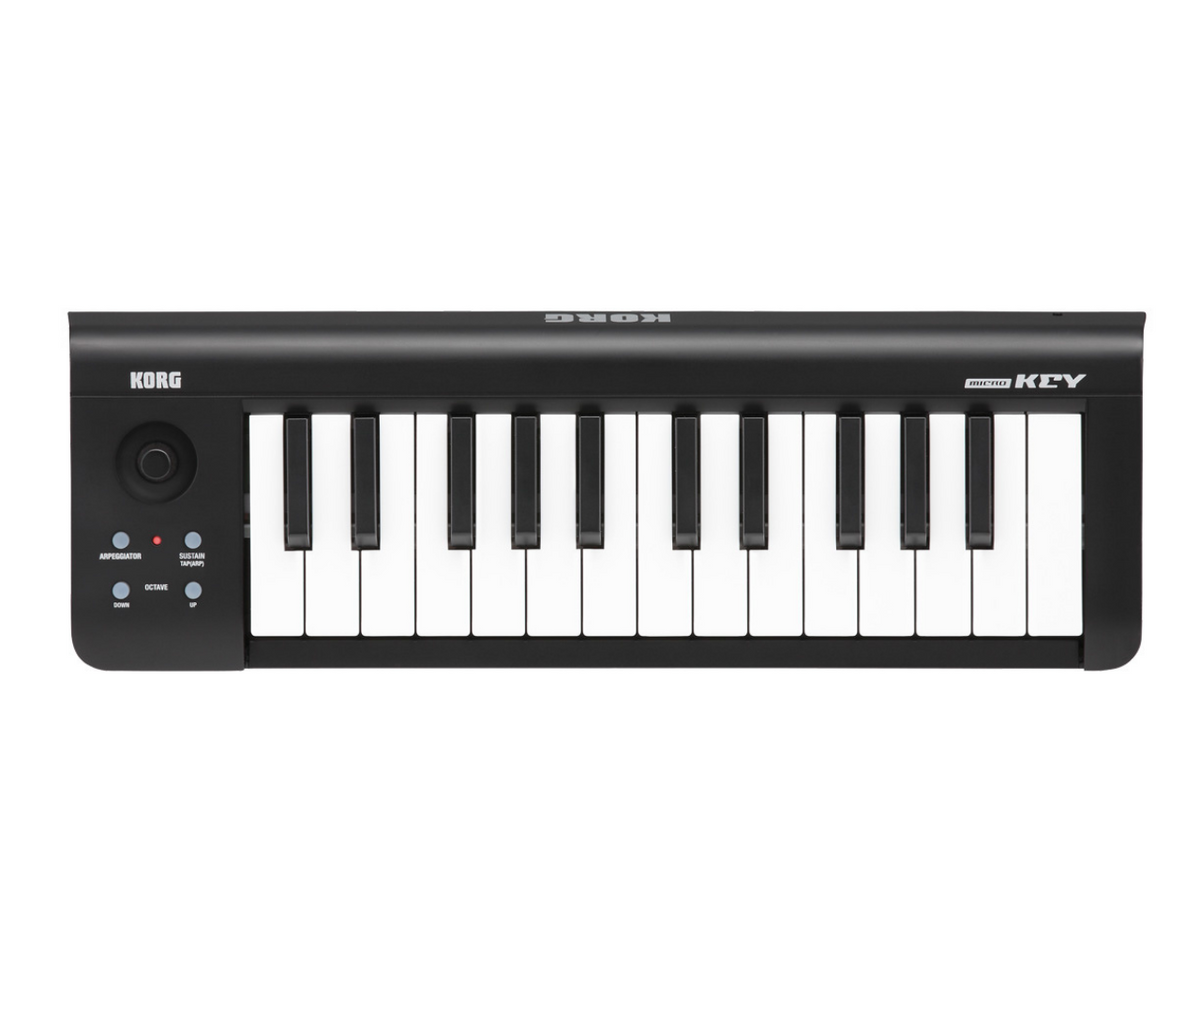 KORG microKEY-25 USB Powered Best MIDI Keyboard Slim, Lightweight, USB Bus-powered Compatible with All Computer-based Music Software